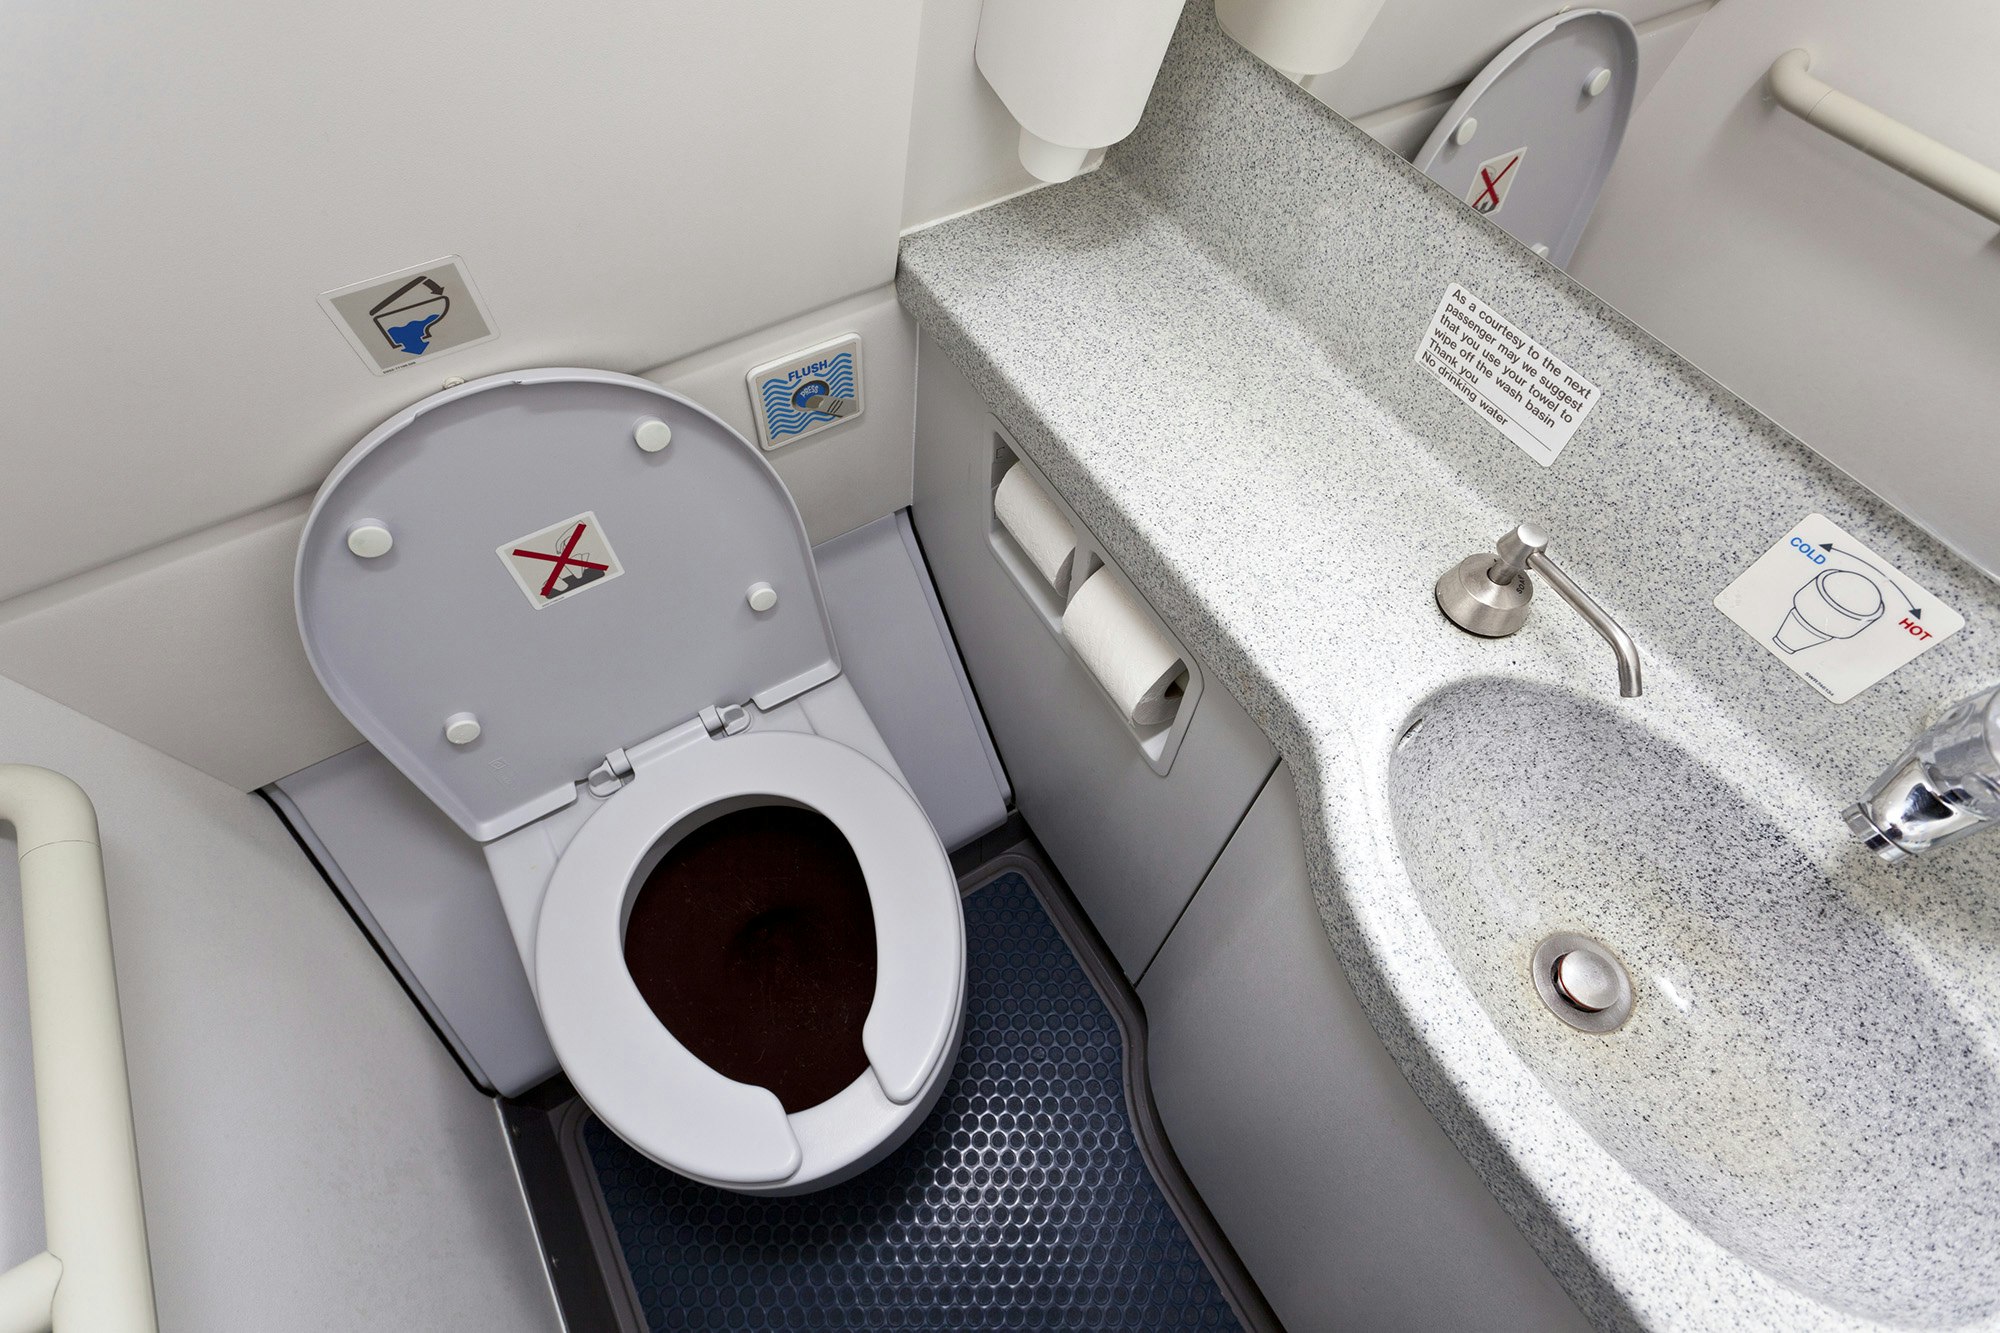 Don't wear absorbent shoes in the plane bathroom!